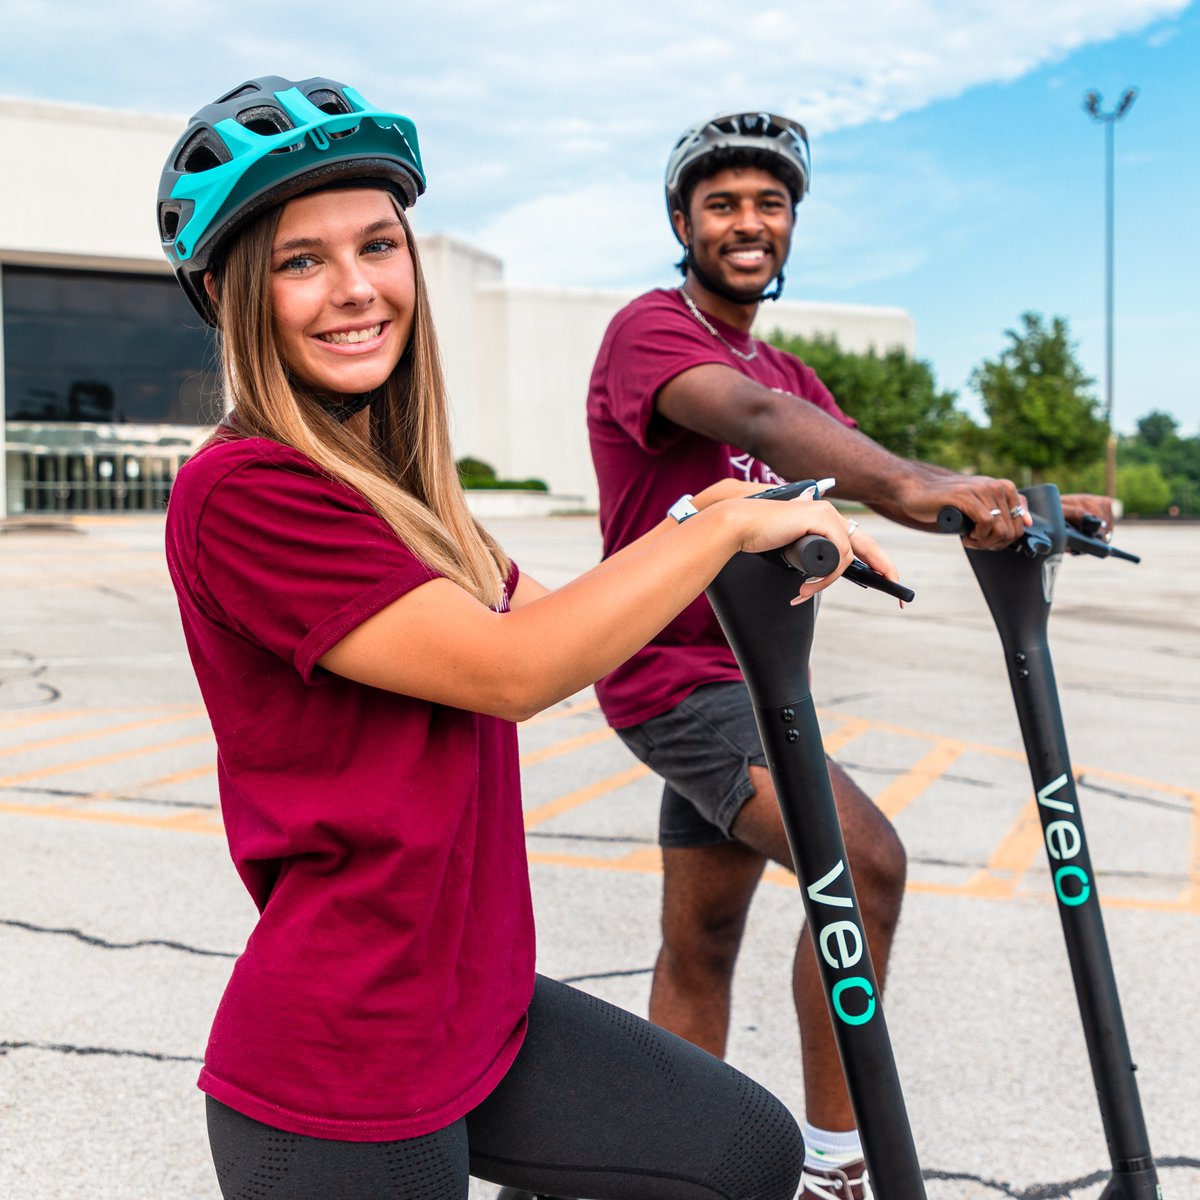 Mark your calendar and get ready to ride! Veo Scooters will be back on March 20th so get ready and get excited. Where will you ride? #thisissiu